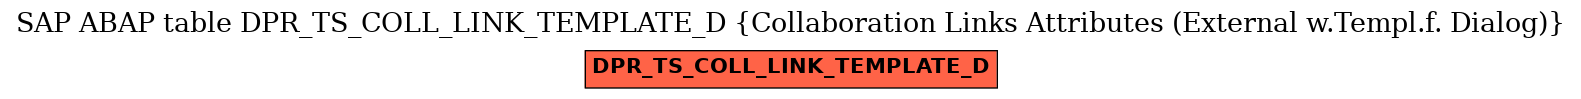 E-R Diagram for table DPR_TS_COLL_LINK_TEMPLATE_D (Collaboration Links Attributes (External w.Templ.f. Dialog))